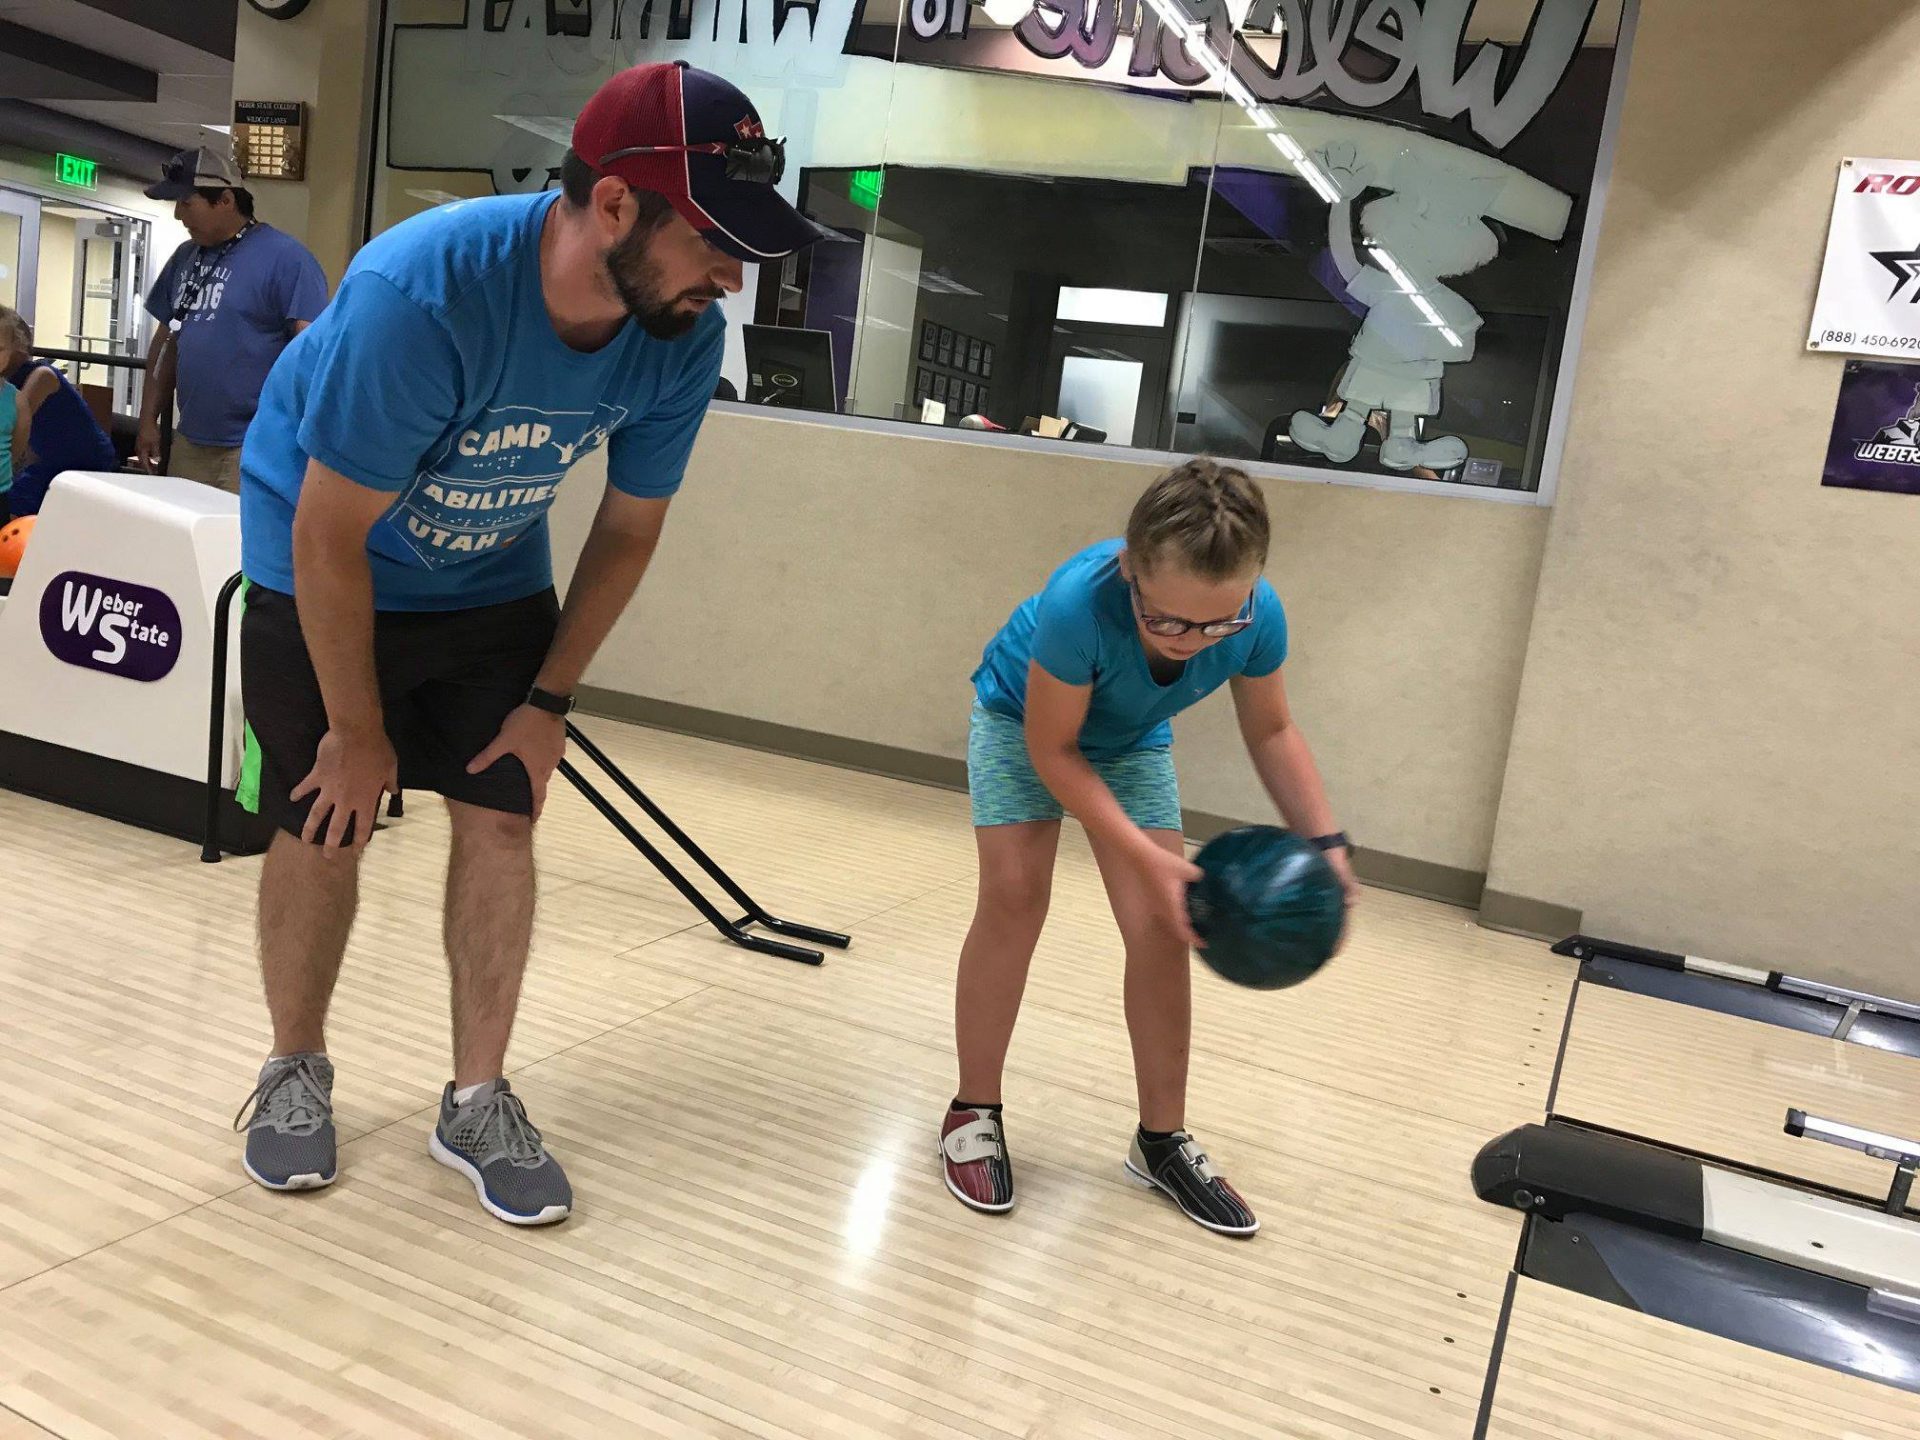 Photo taken from the side. An athlete is holding a large blue bowling ball with two hands. She is positioned in front of the bowling lane. Her coach is standing behind her with his hands on his knees awaiting her throw.